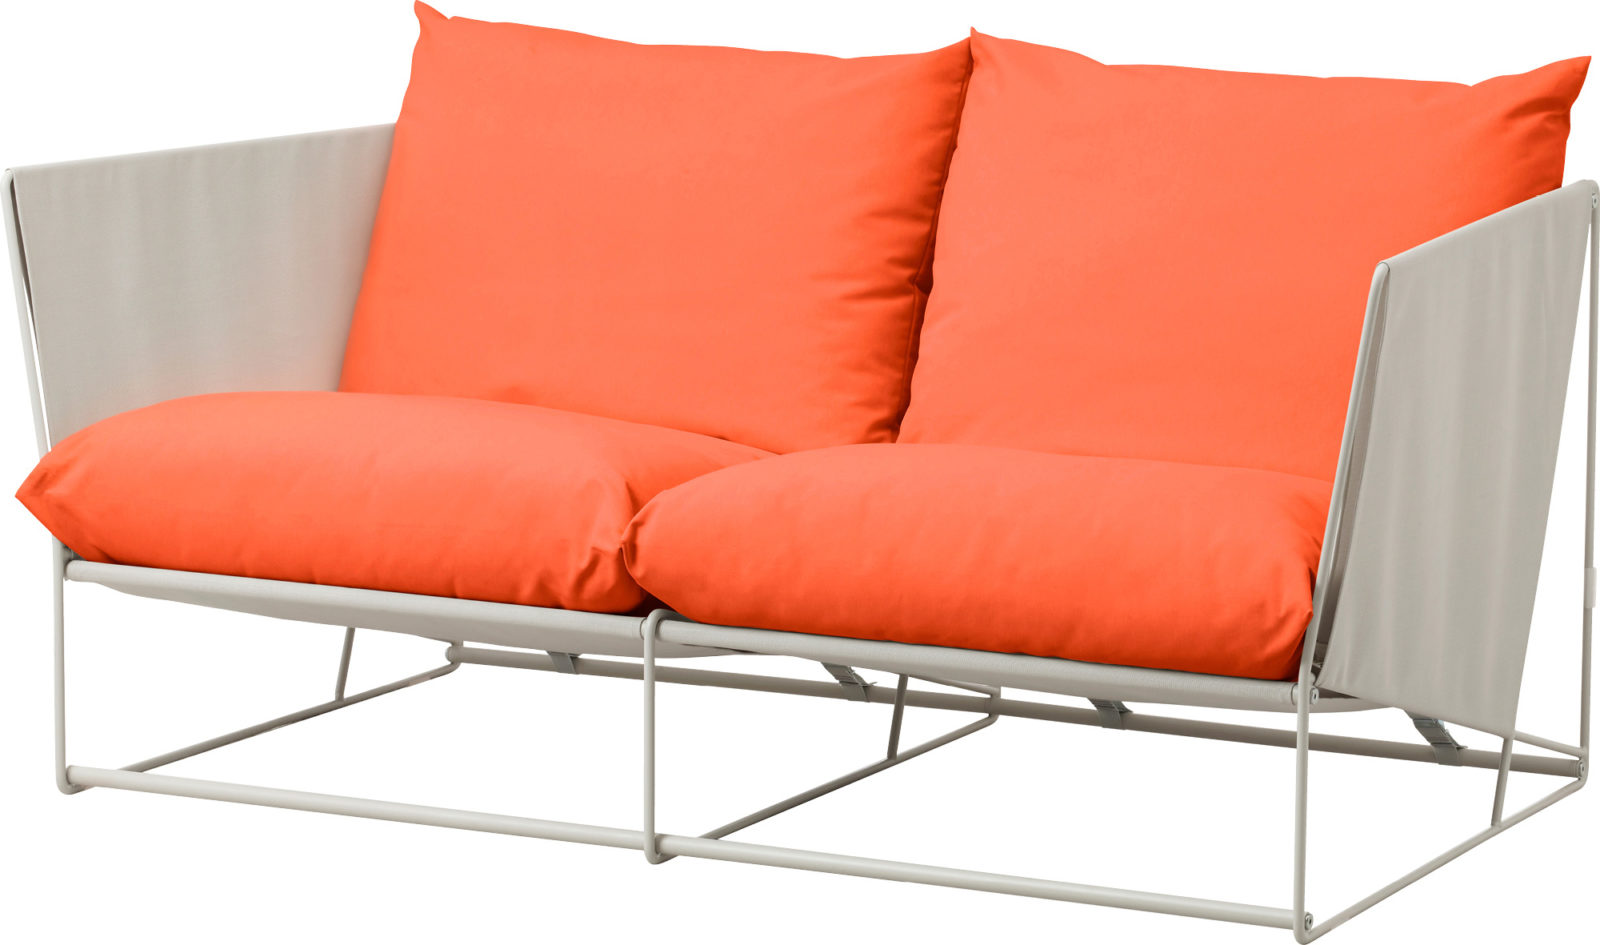 Two-seater beige sofa with plump orange pillows, the base made of light steel tubes covered in mesh, HAVSTEN.